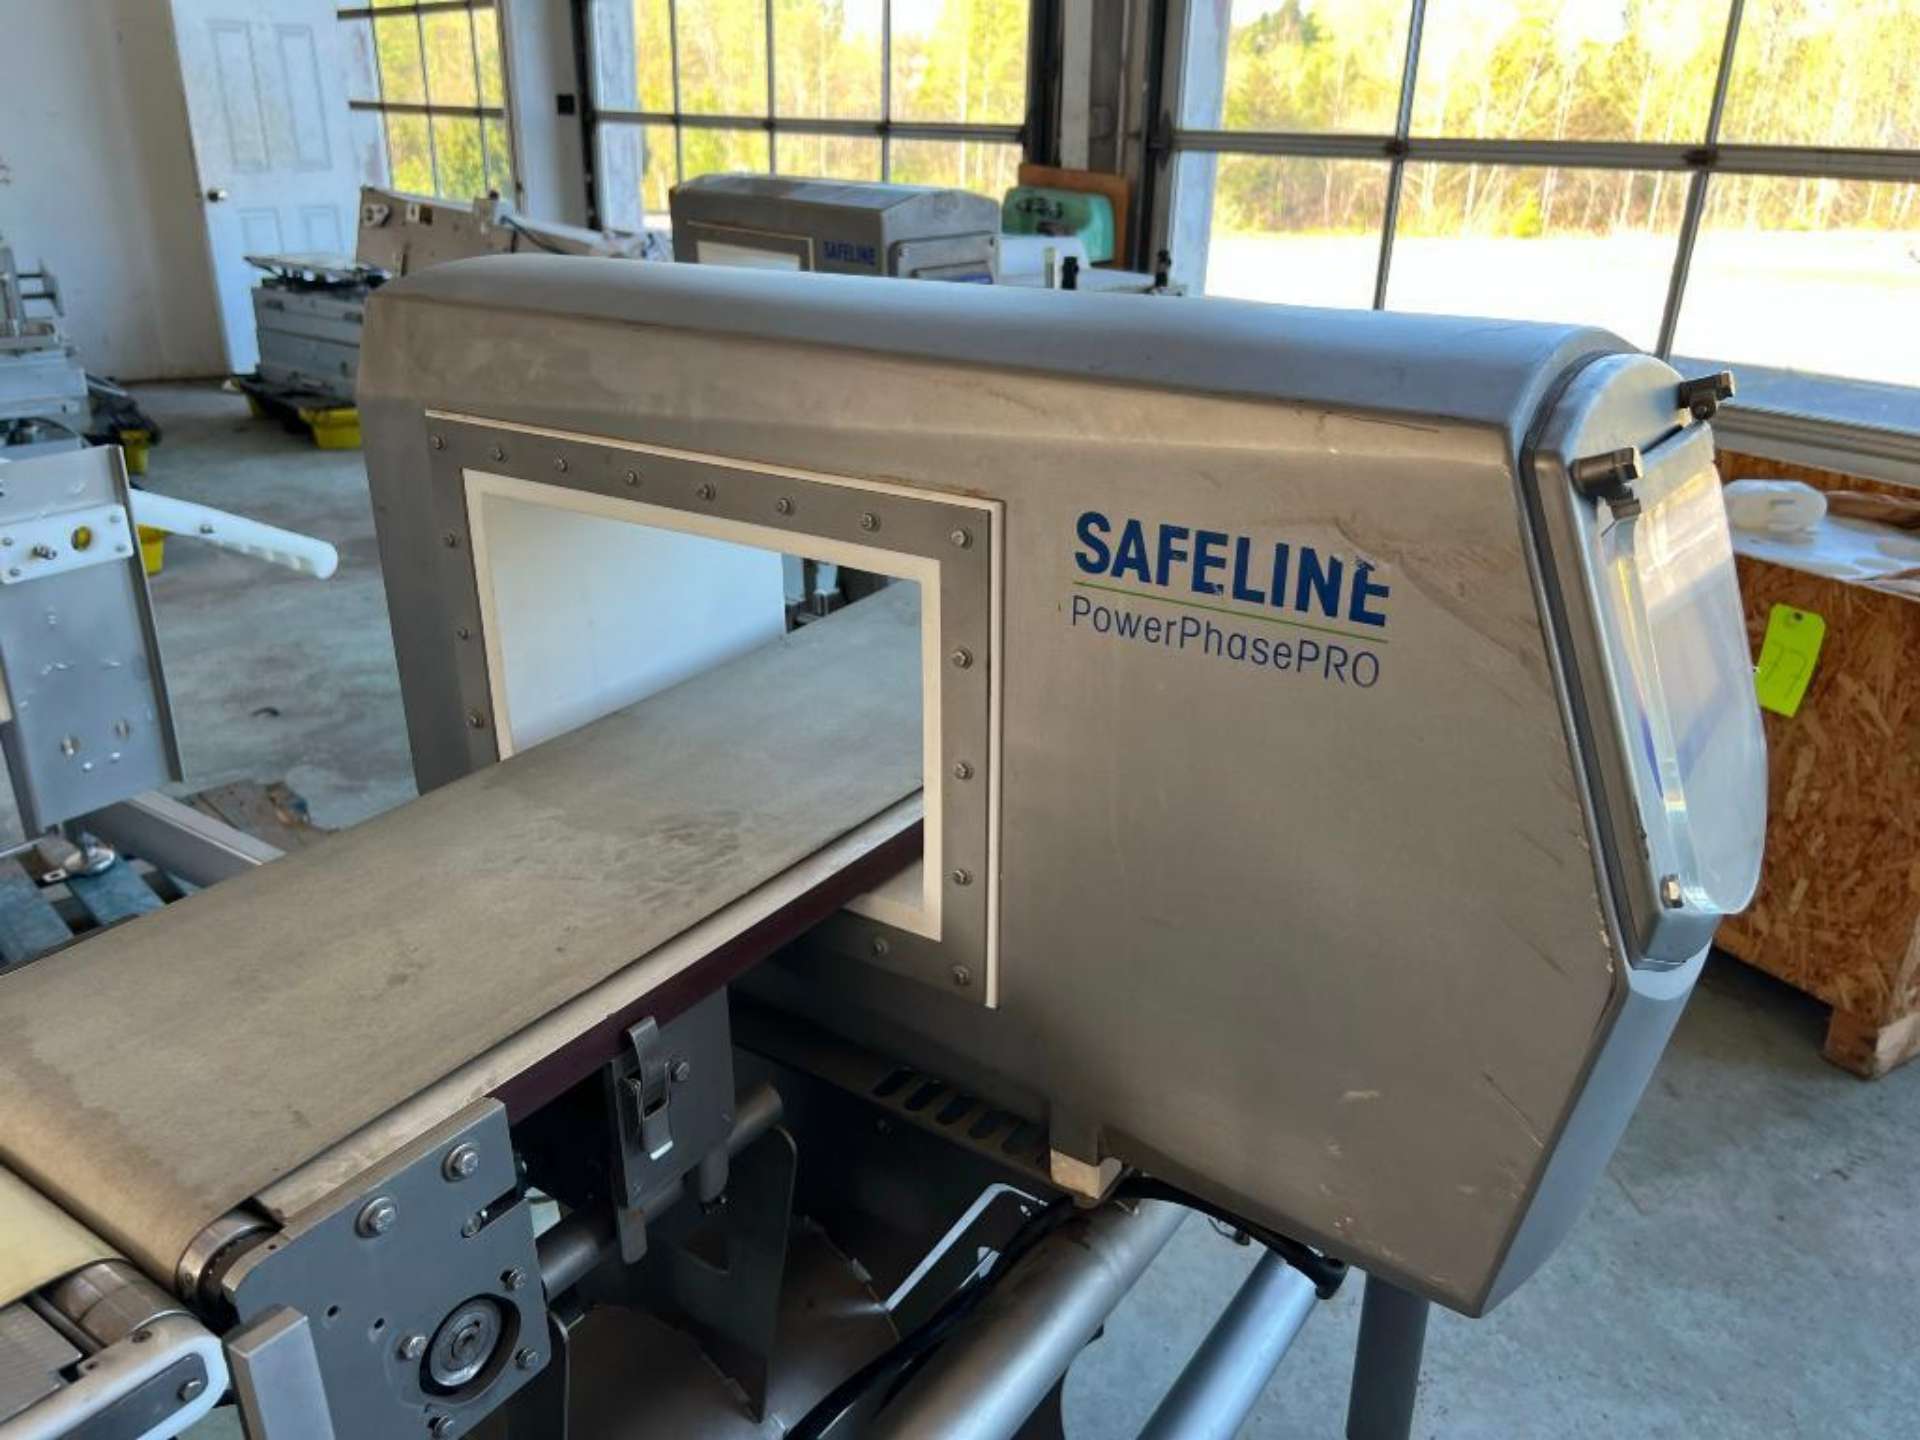 Safeline powerphase pro metal detector check weigh system, MODEL: V4 rect 100/300/900, sn: 108200. 1 - Image 6 of 12